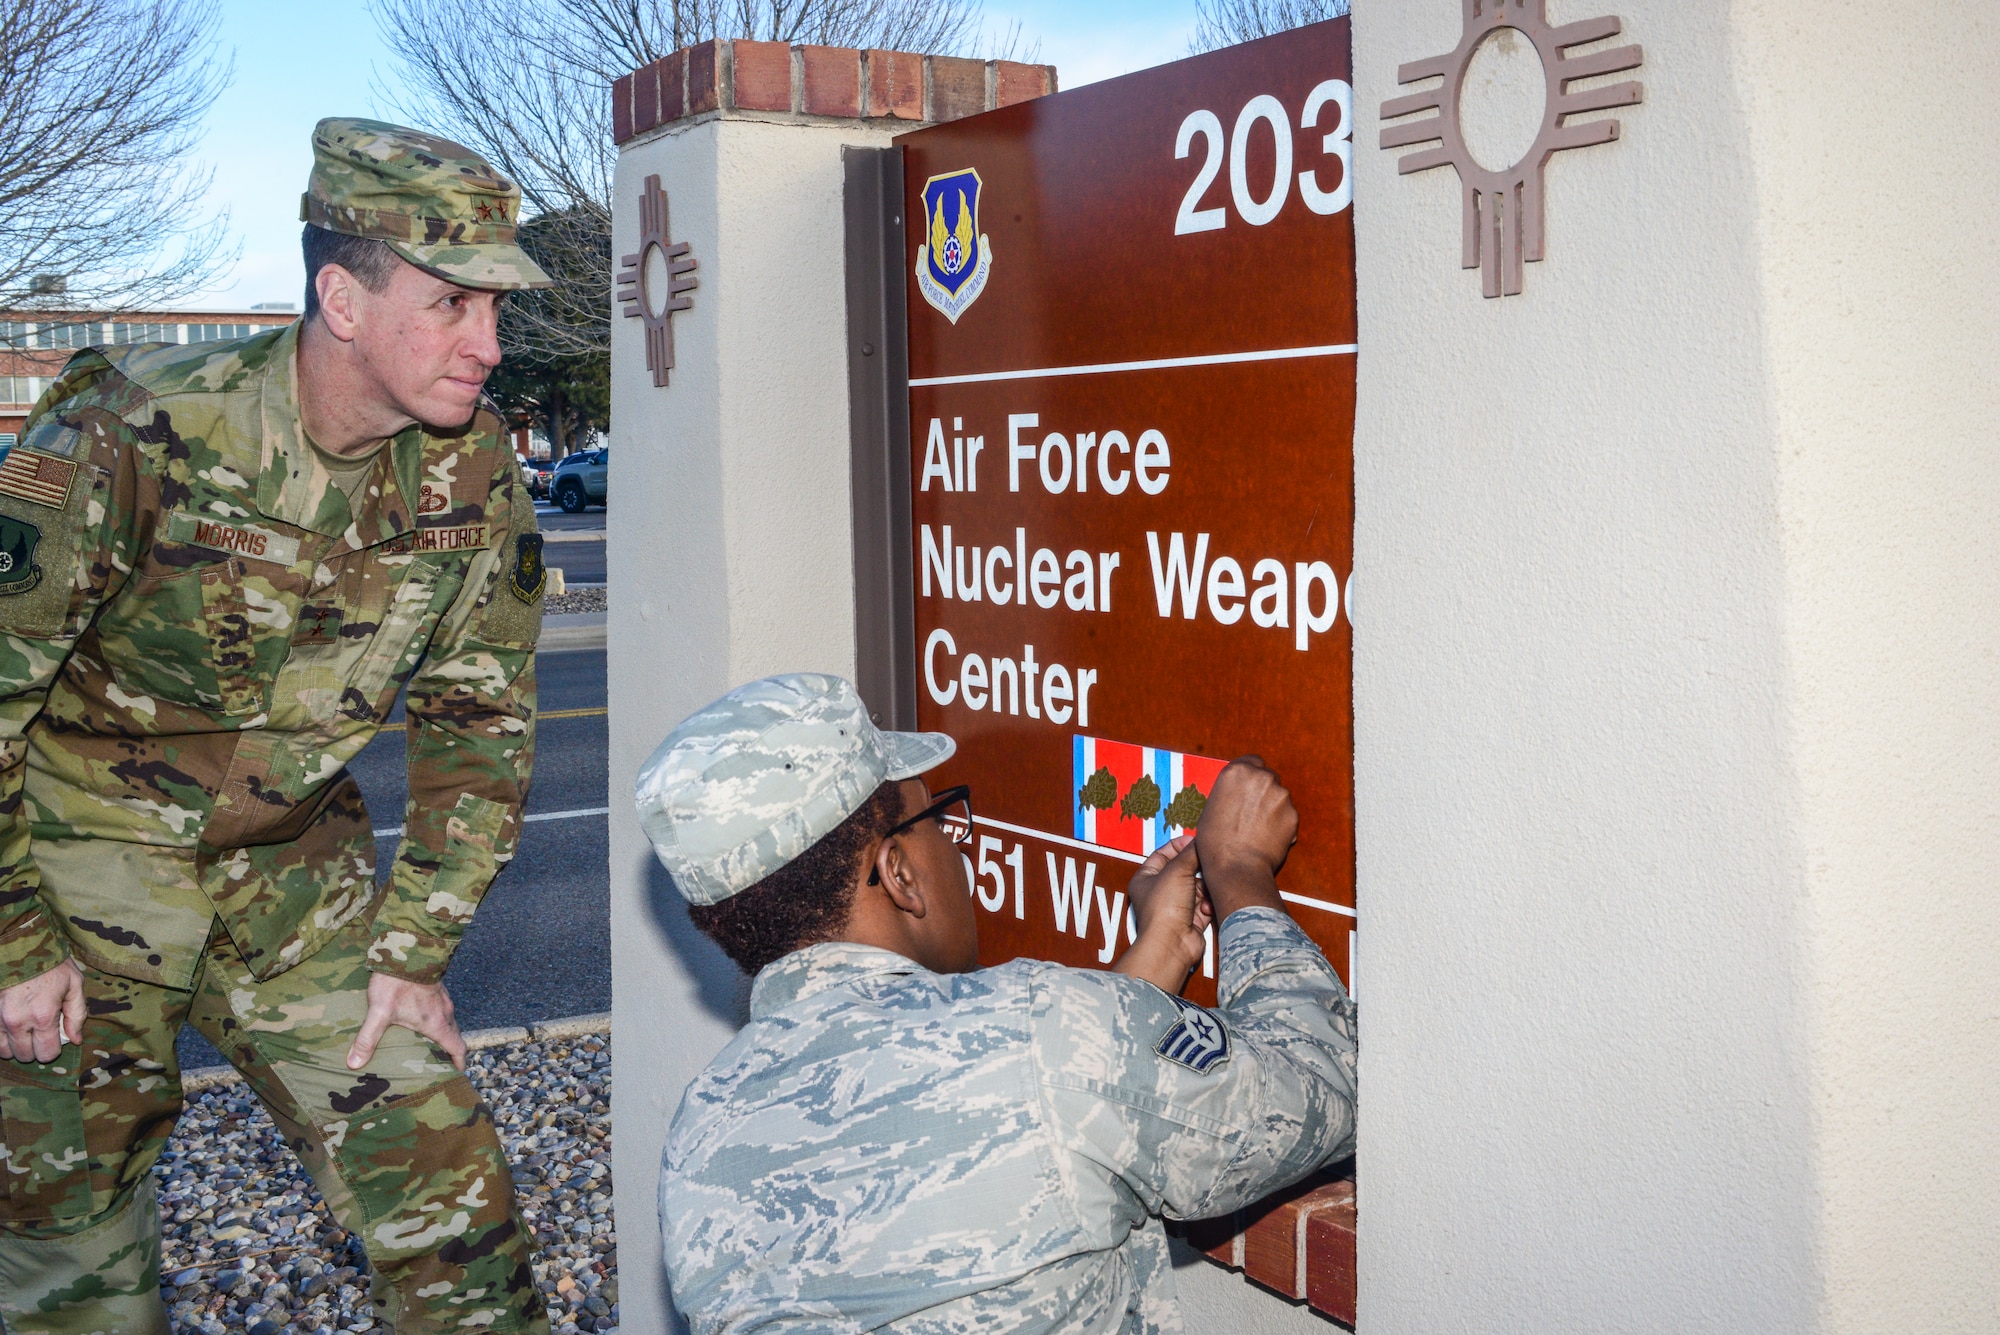 Air Force Nuclear Weapons Center Commander Maj. Gen. Shaun Morris and AFNWC’s Staff Sgt. Mychavia Harris,  the center’s most junior member in 2016, prepare to place a fourth oak leaf cluster on the center’s sign on Wyoming Blvd. here Feb. 1, 2019. The oak leaf cluster was the center’s fifth organizational excellence award since its inception in March of 2006. (U.S. Air Force photo by Jim Fisher)